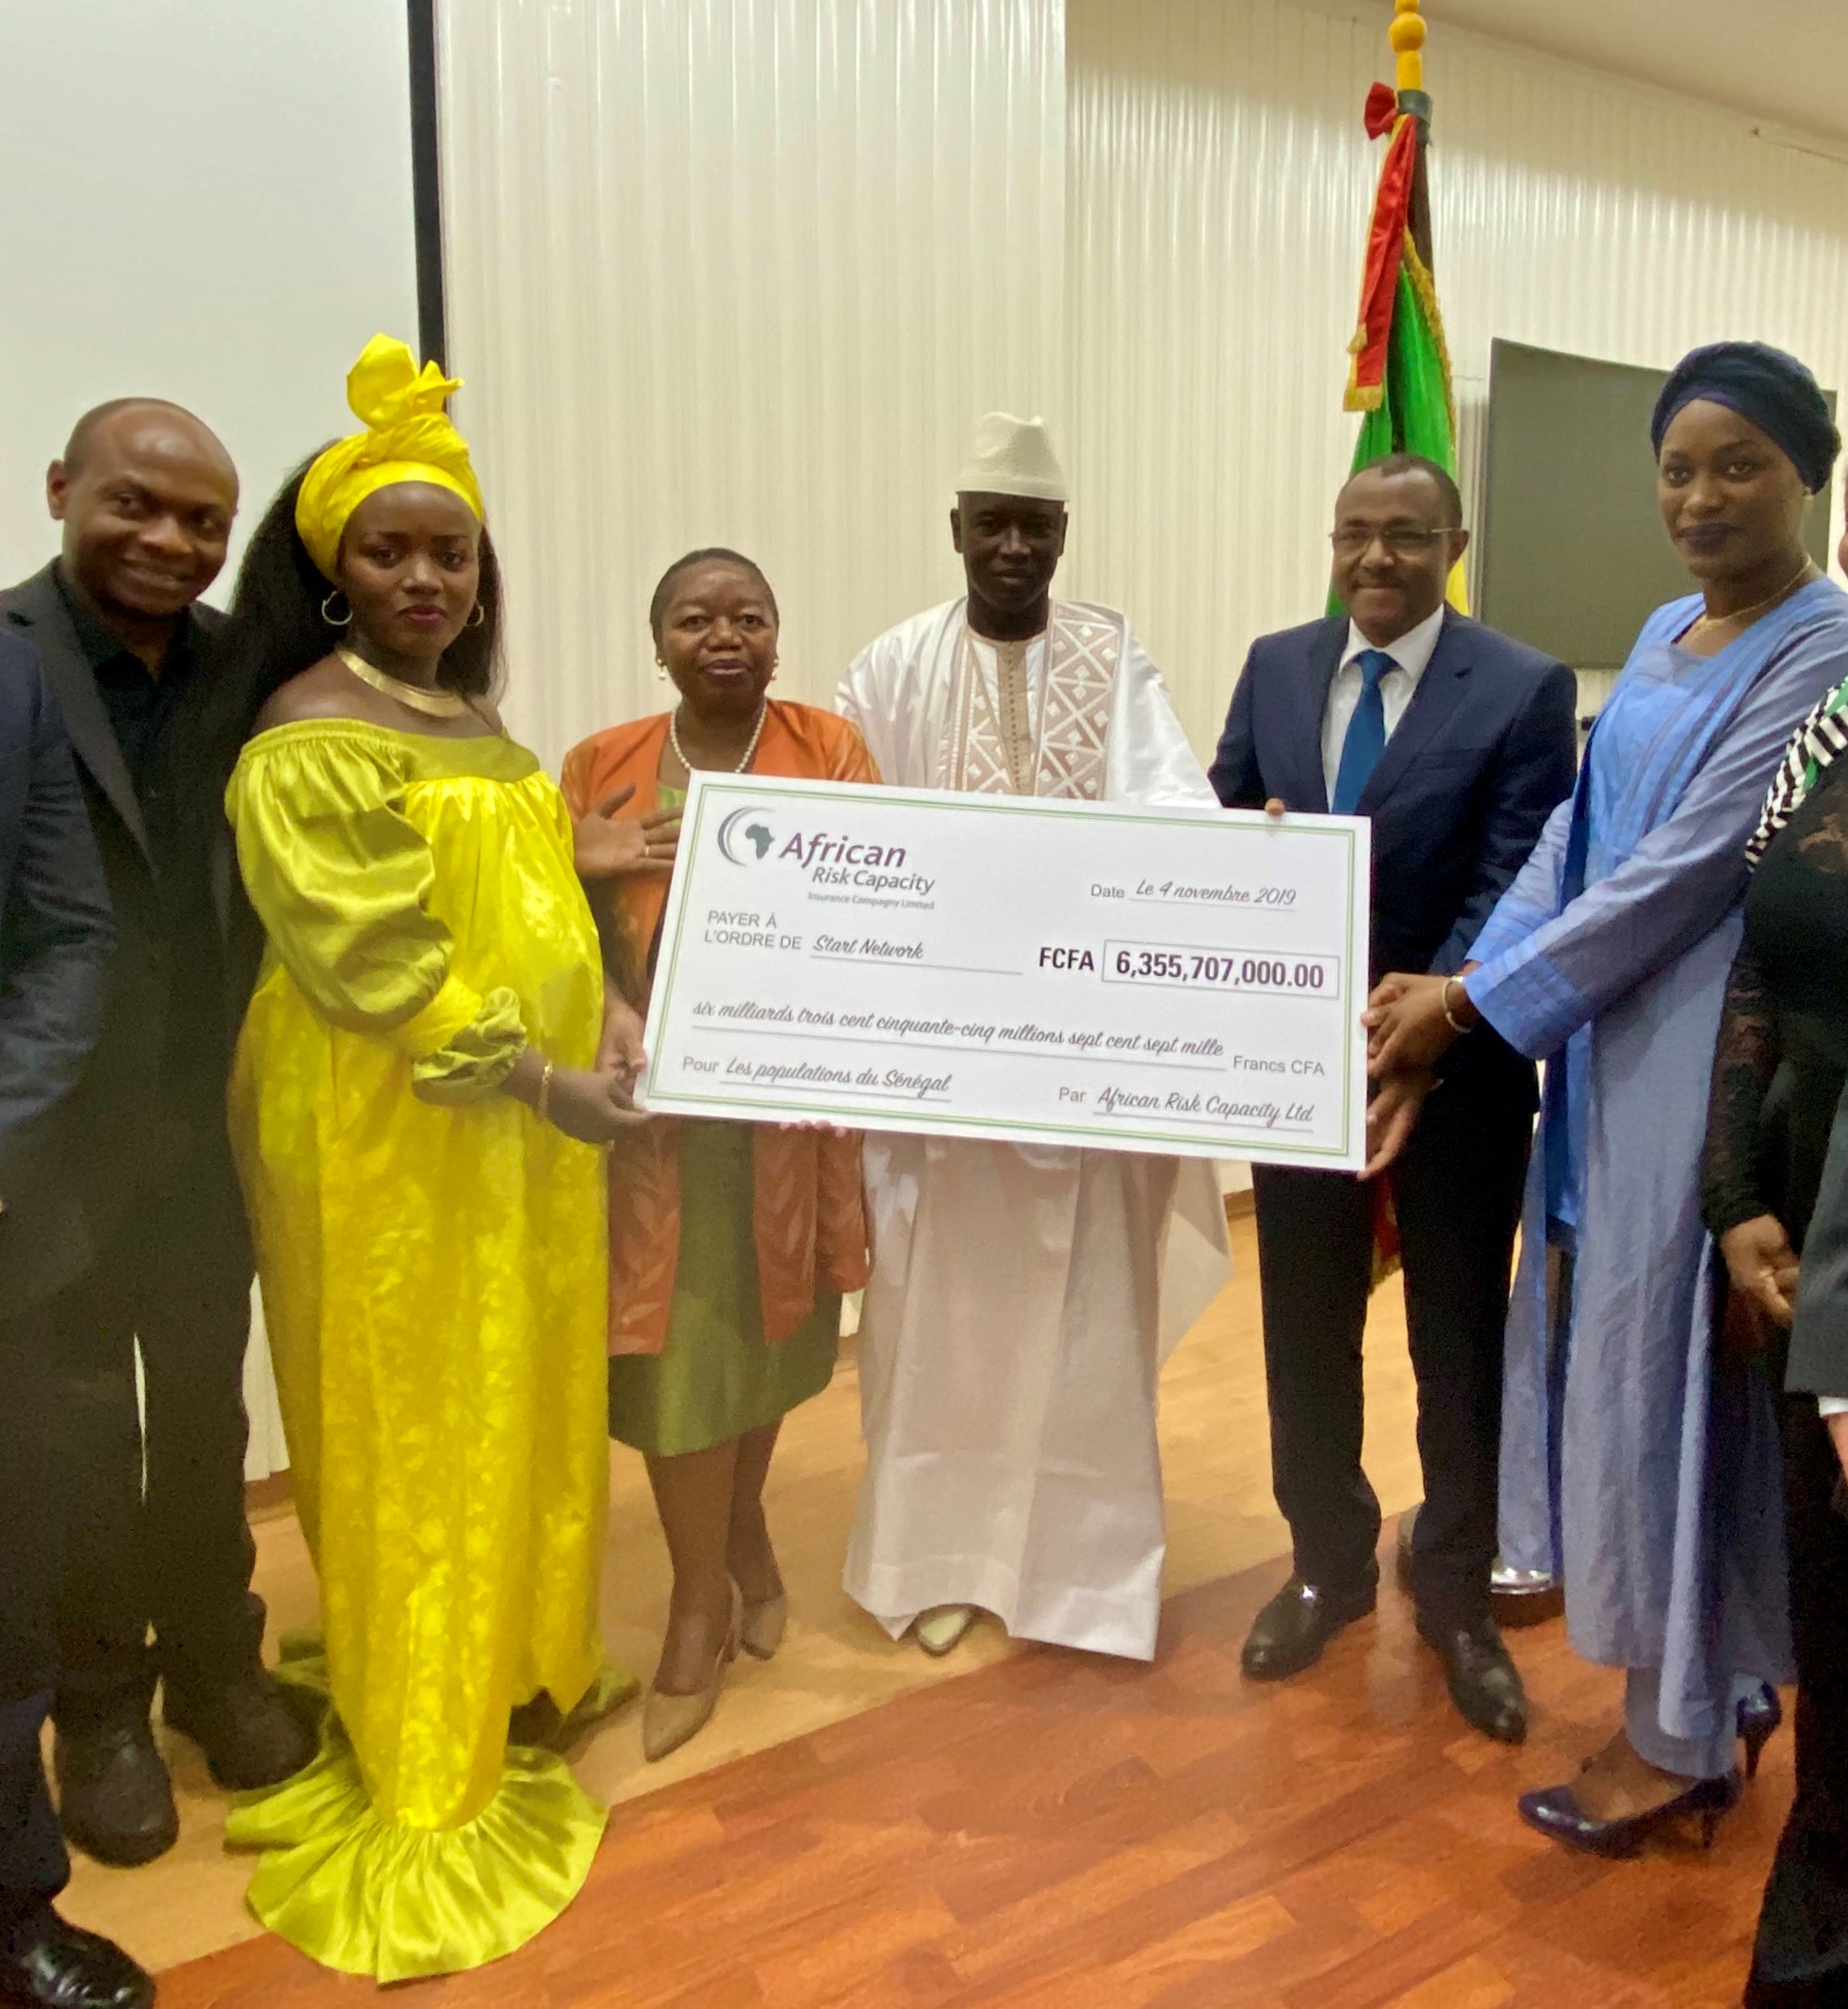 Senegal Receives US$23.1m From African Risk Capacity Insurance Limited Cheque for Drought Response